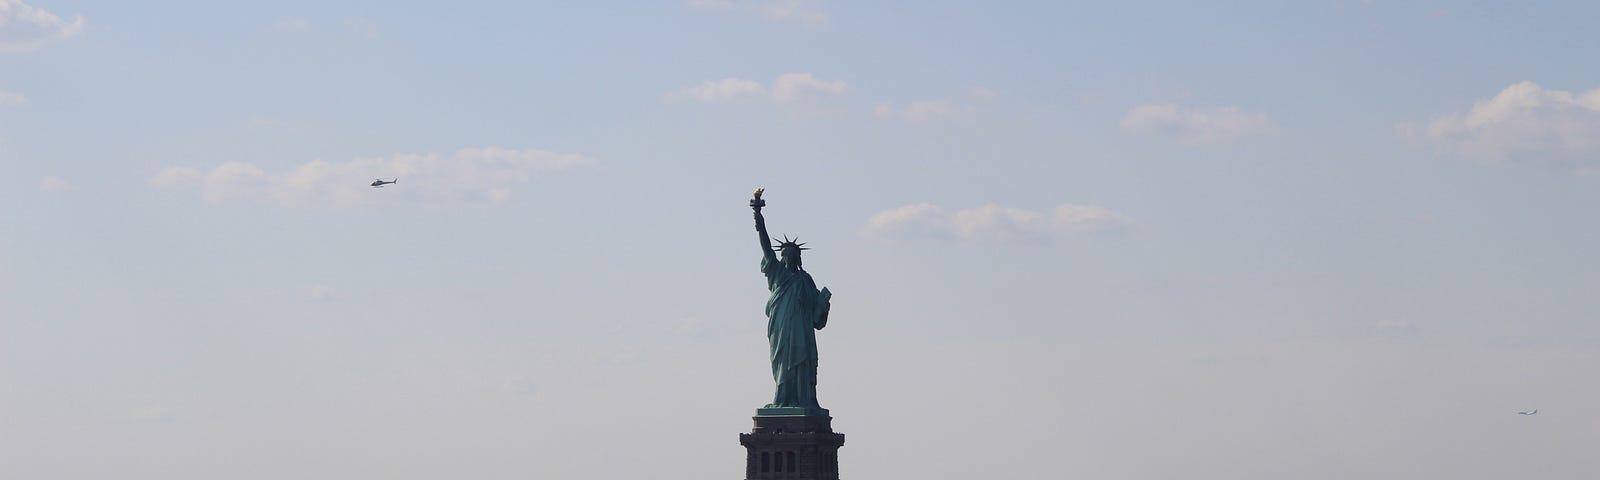 This is a photo of the Statue of Liberty